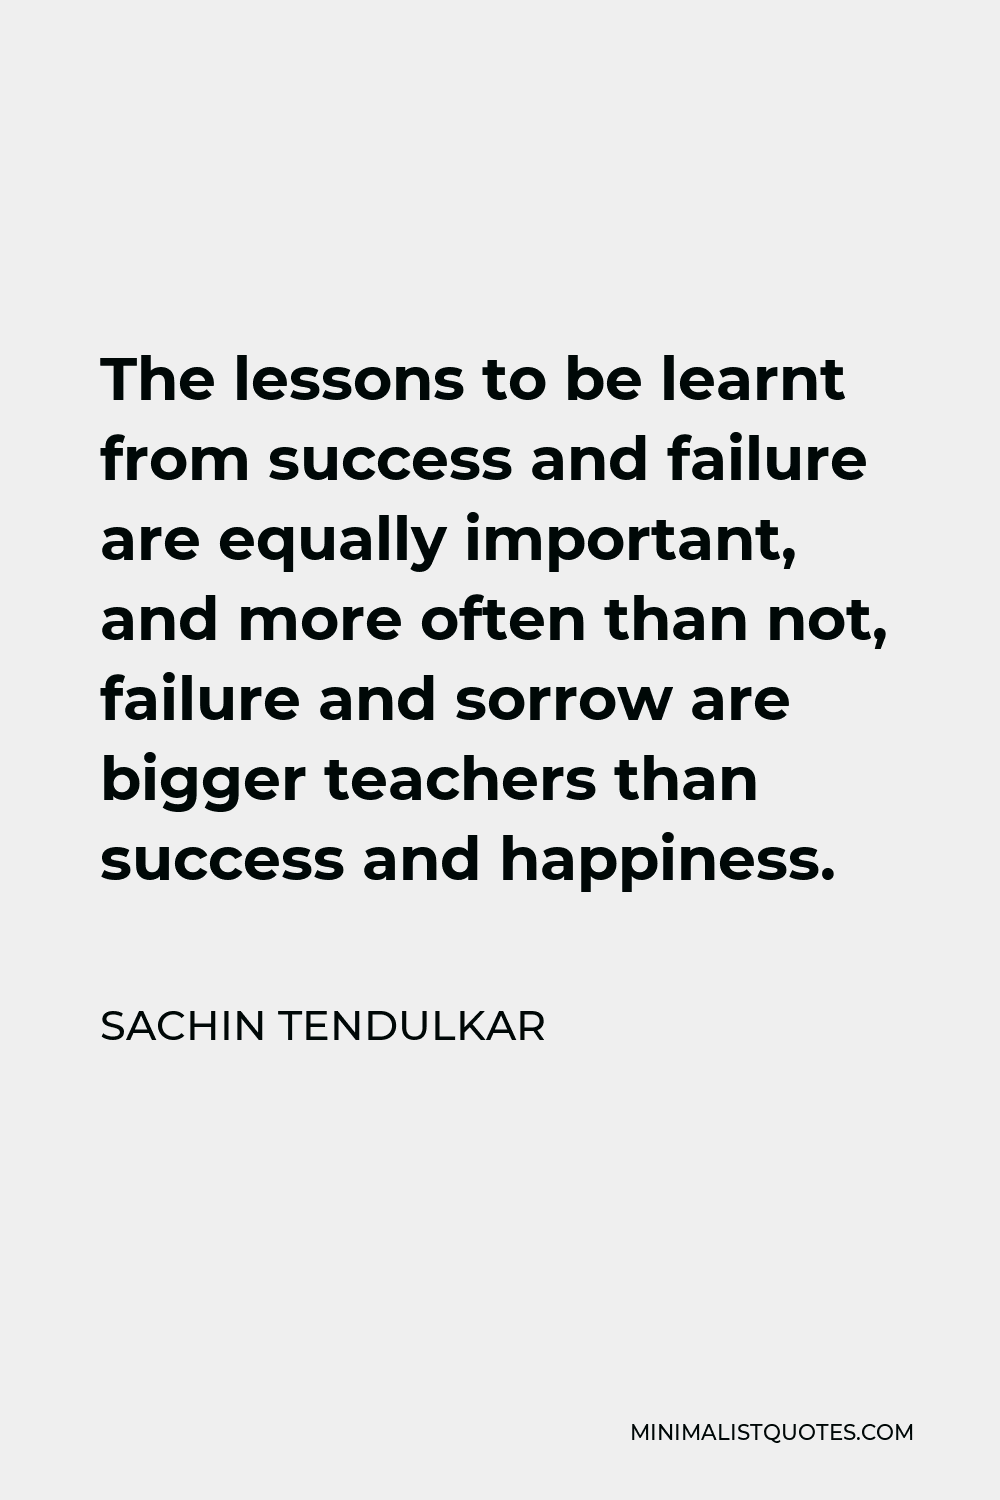 Sachin Tendulkar Quote - The lessons to be learnt from success and failure are equally important, and more often than not, failure and sorrow are bigger teachers than success and happiness.